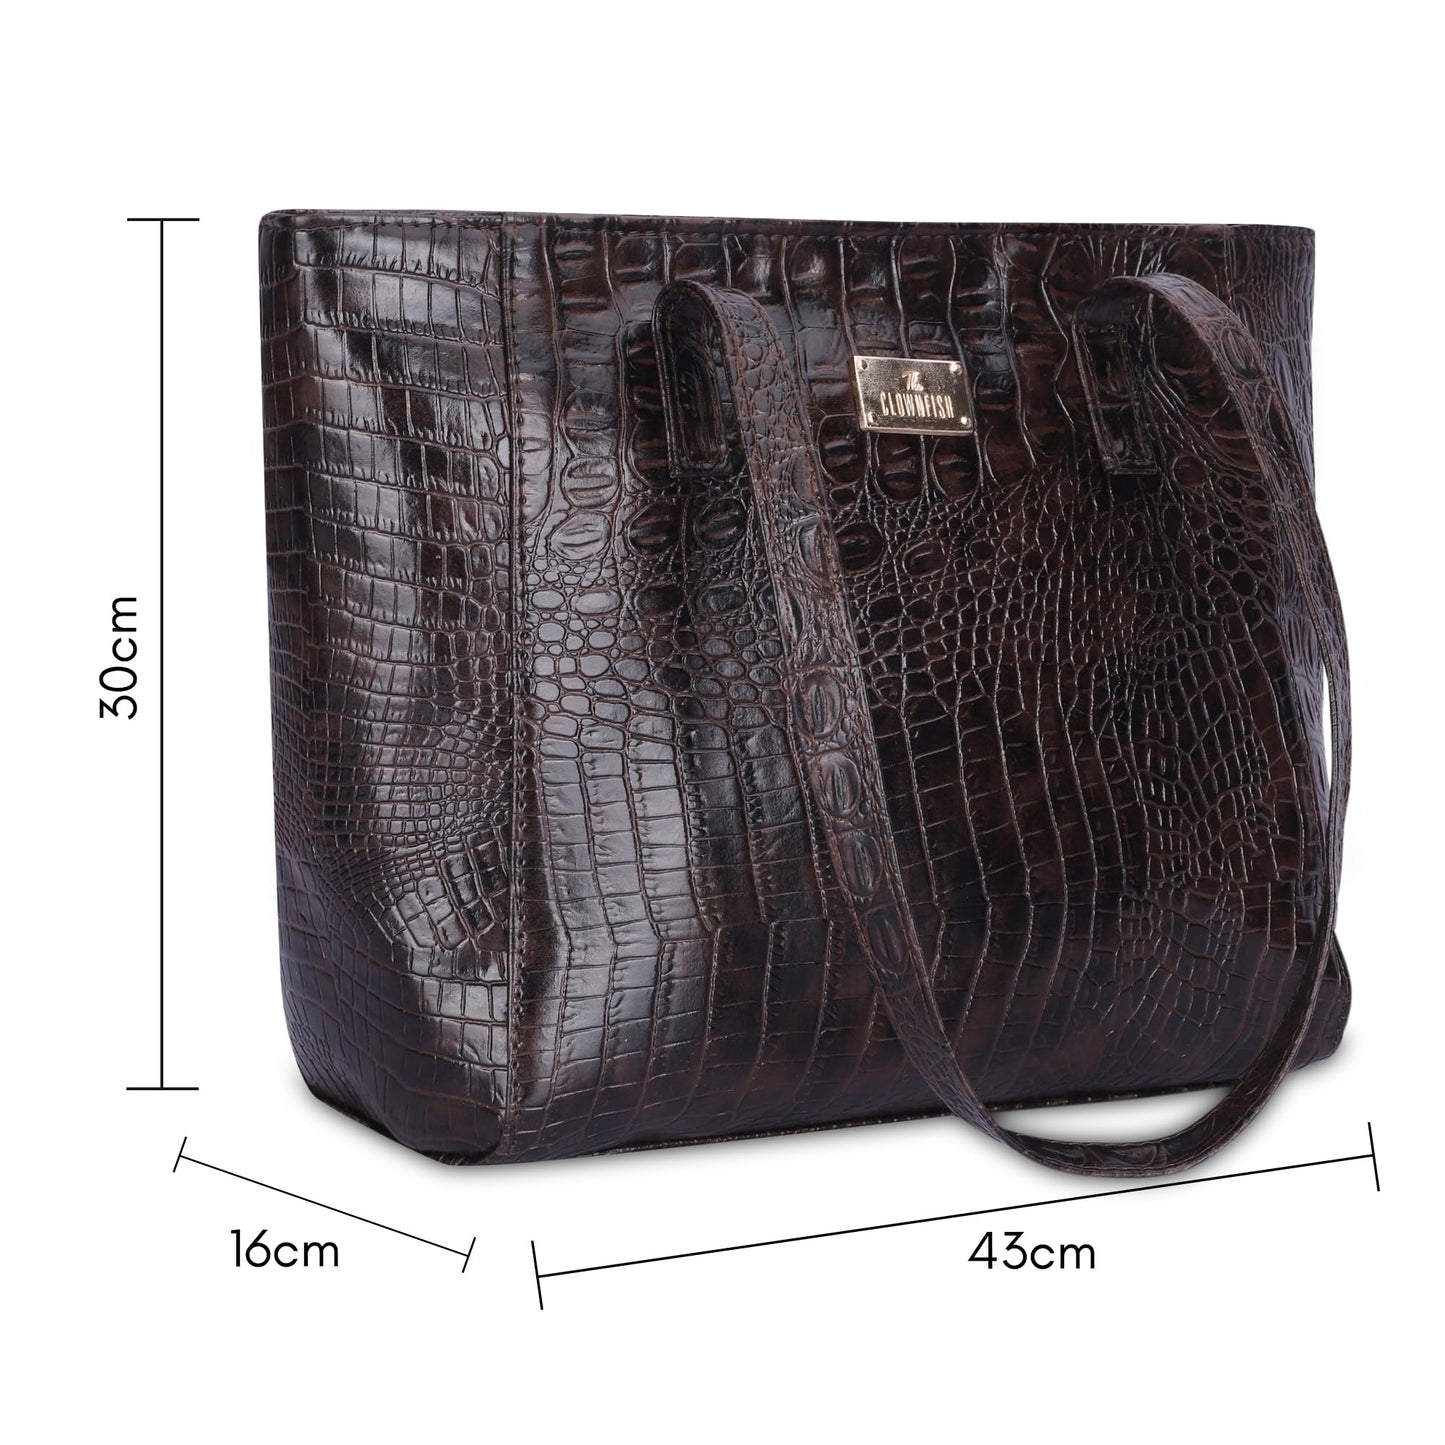 THE CLOWNFISH Valentine Faux Leather Handbag for Women Office Bag Ladies Shoulder Bag Tote for Women College Girls (Dark Brown-Crocodile Texture)